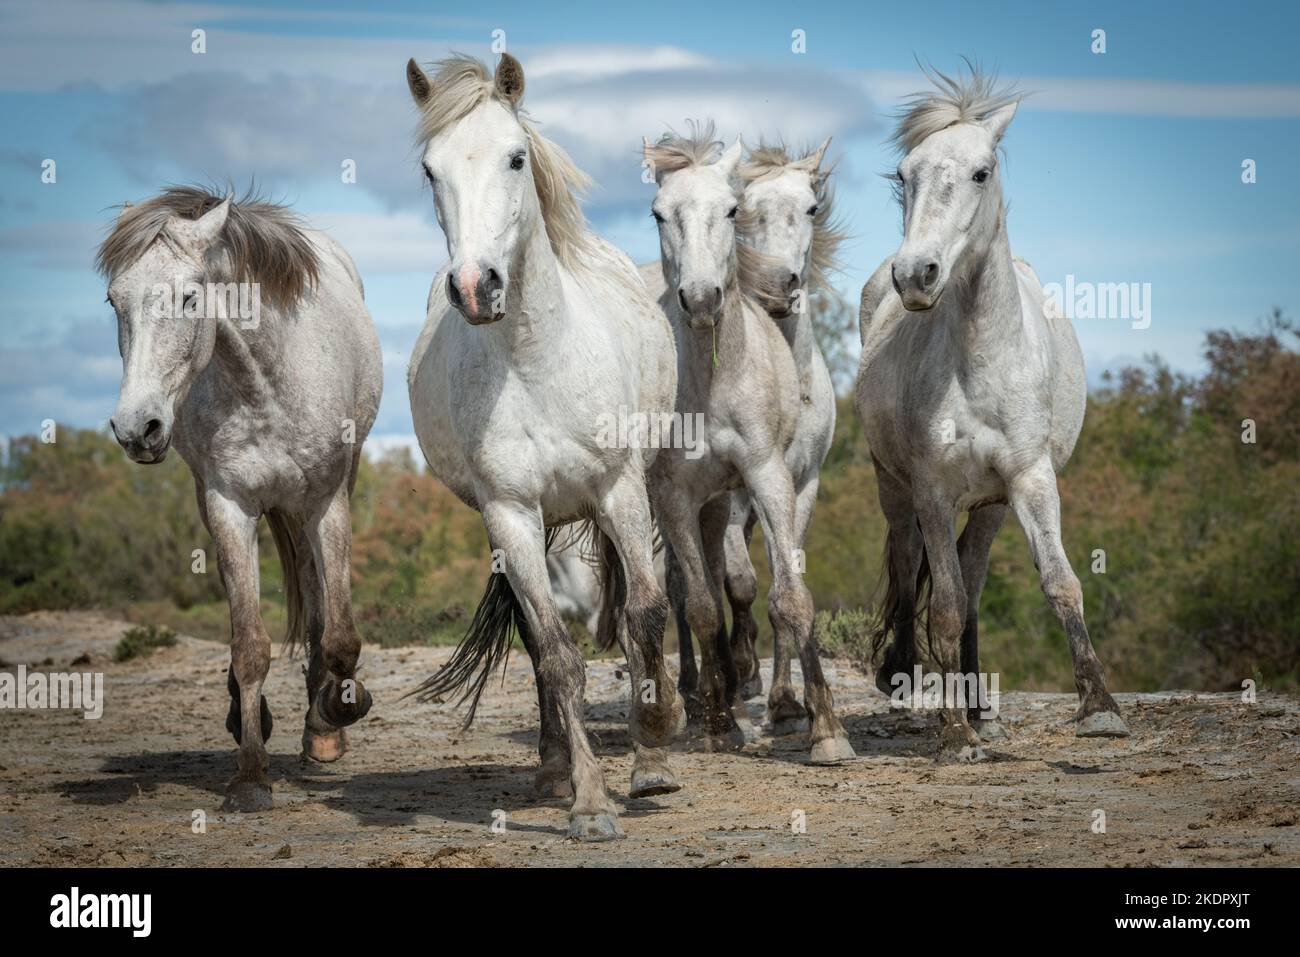 27/04/2019 : White horses are walking in the sand all over the landskape  of Camargue, south of France Stock Photo